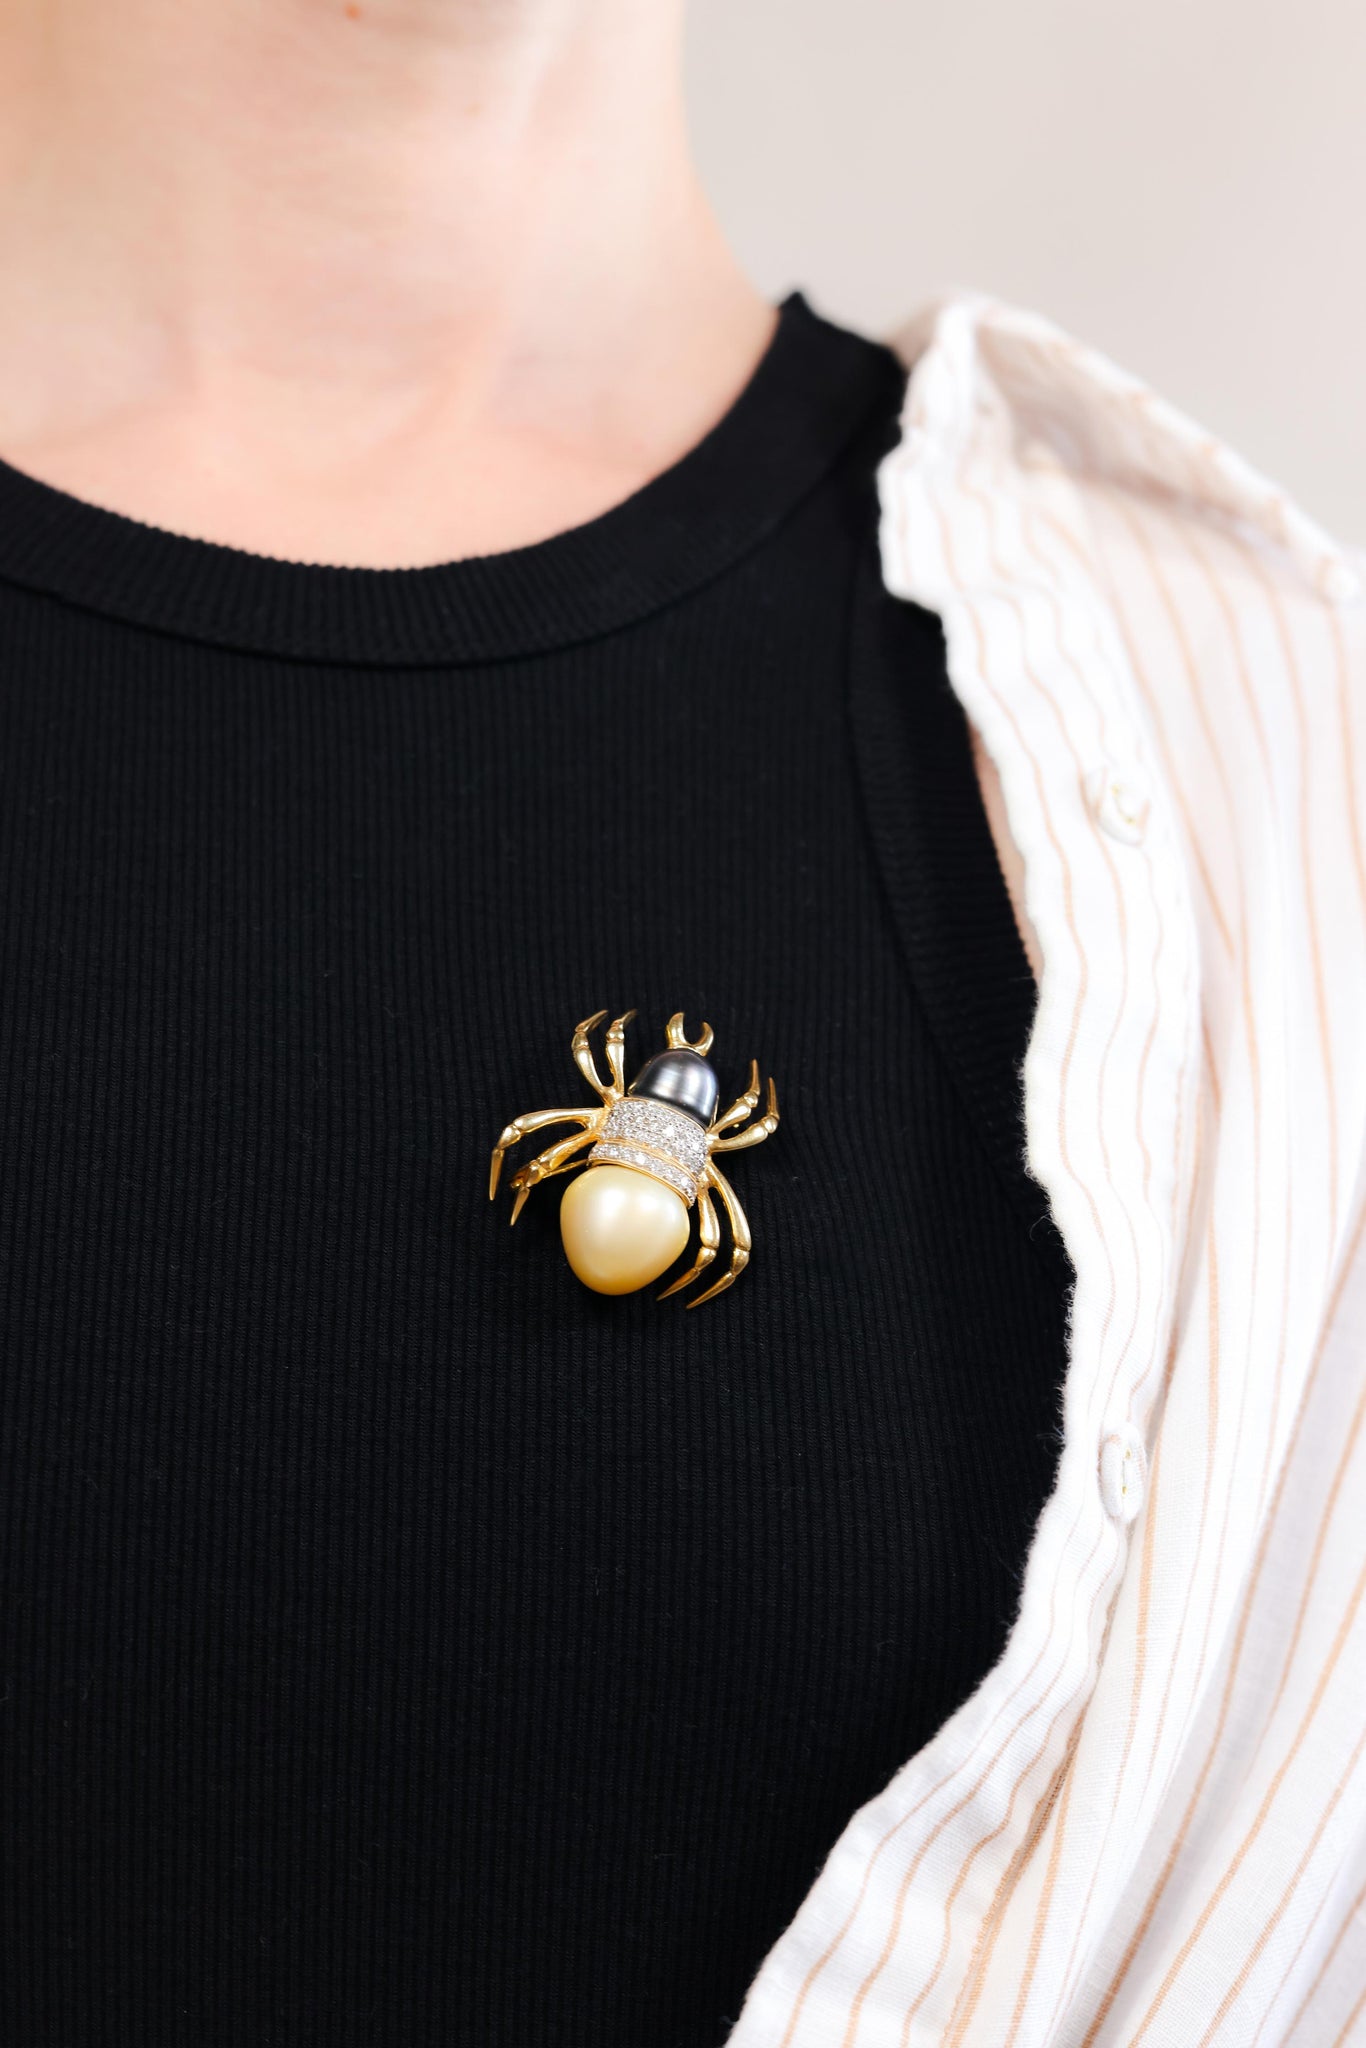 Vintage Pearl Diamond 18k Yellow Gold Spider Brooch  Jack Weir & Sons   